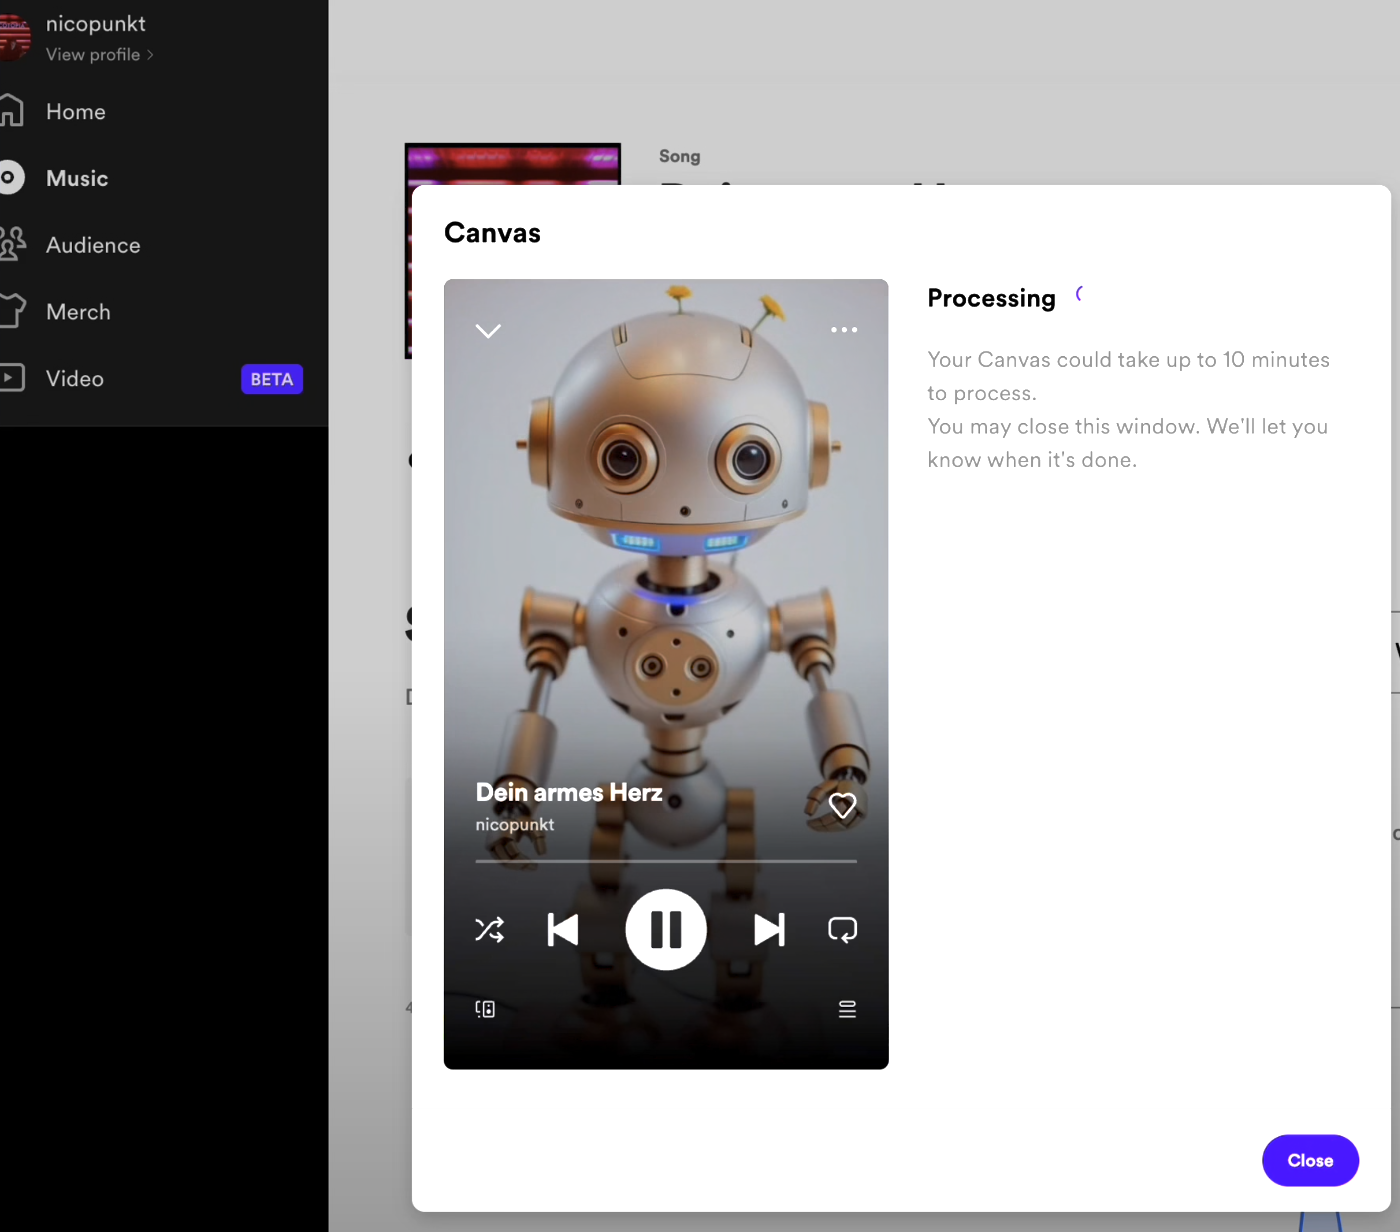 Spotify Canvas processing